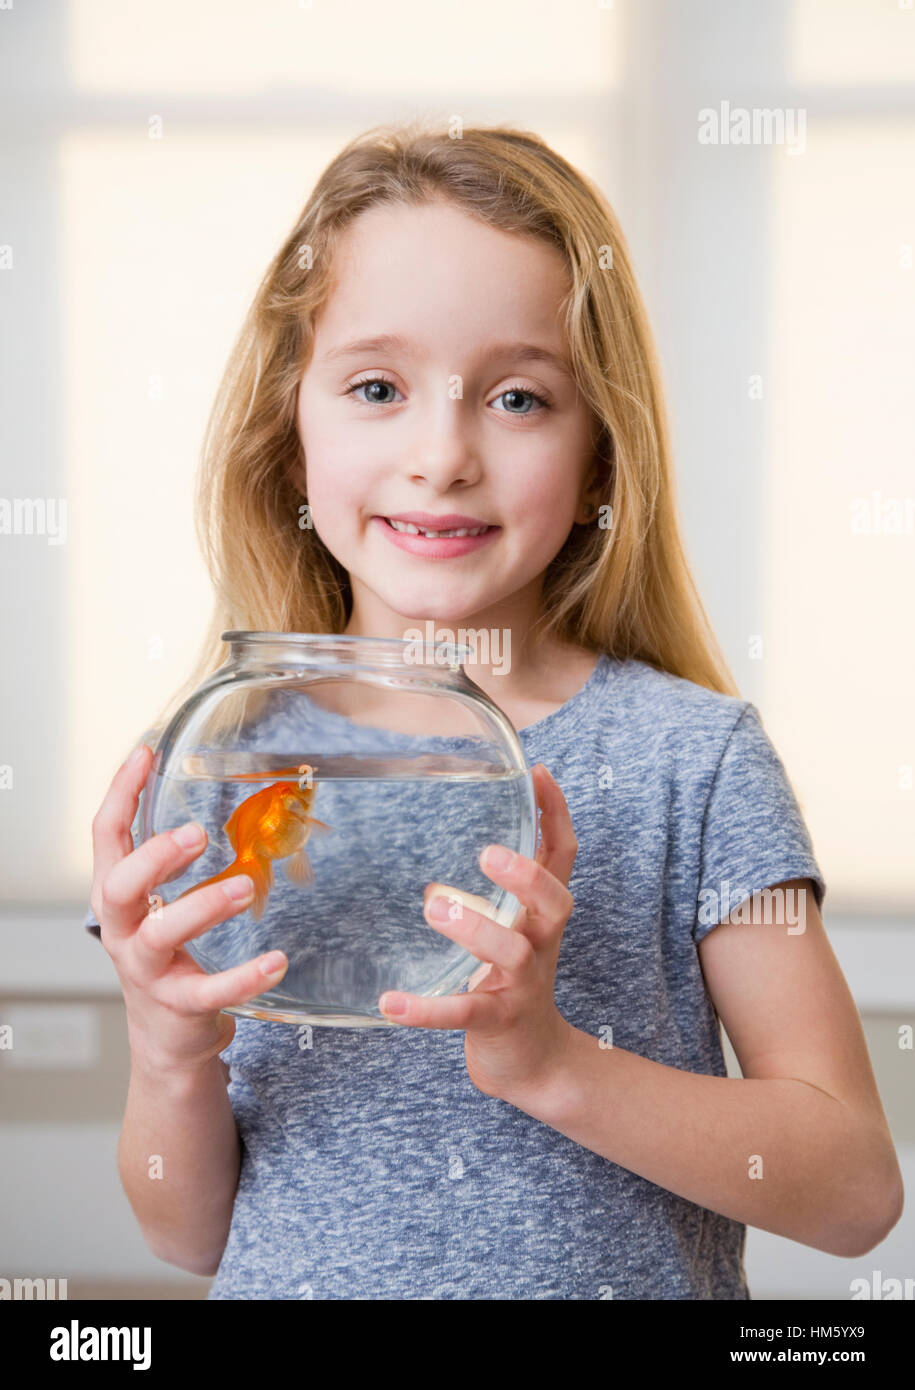 Portrait of Girl (6-7) holding goldfish in fishbowl Banque D'Images